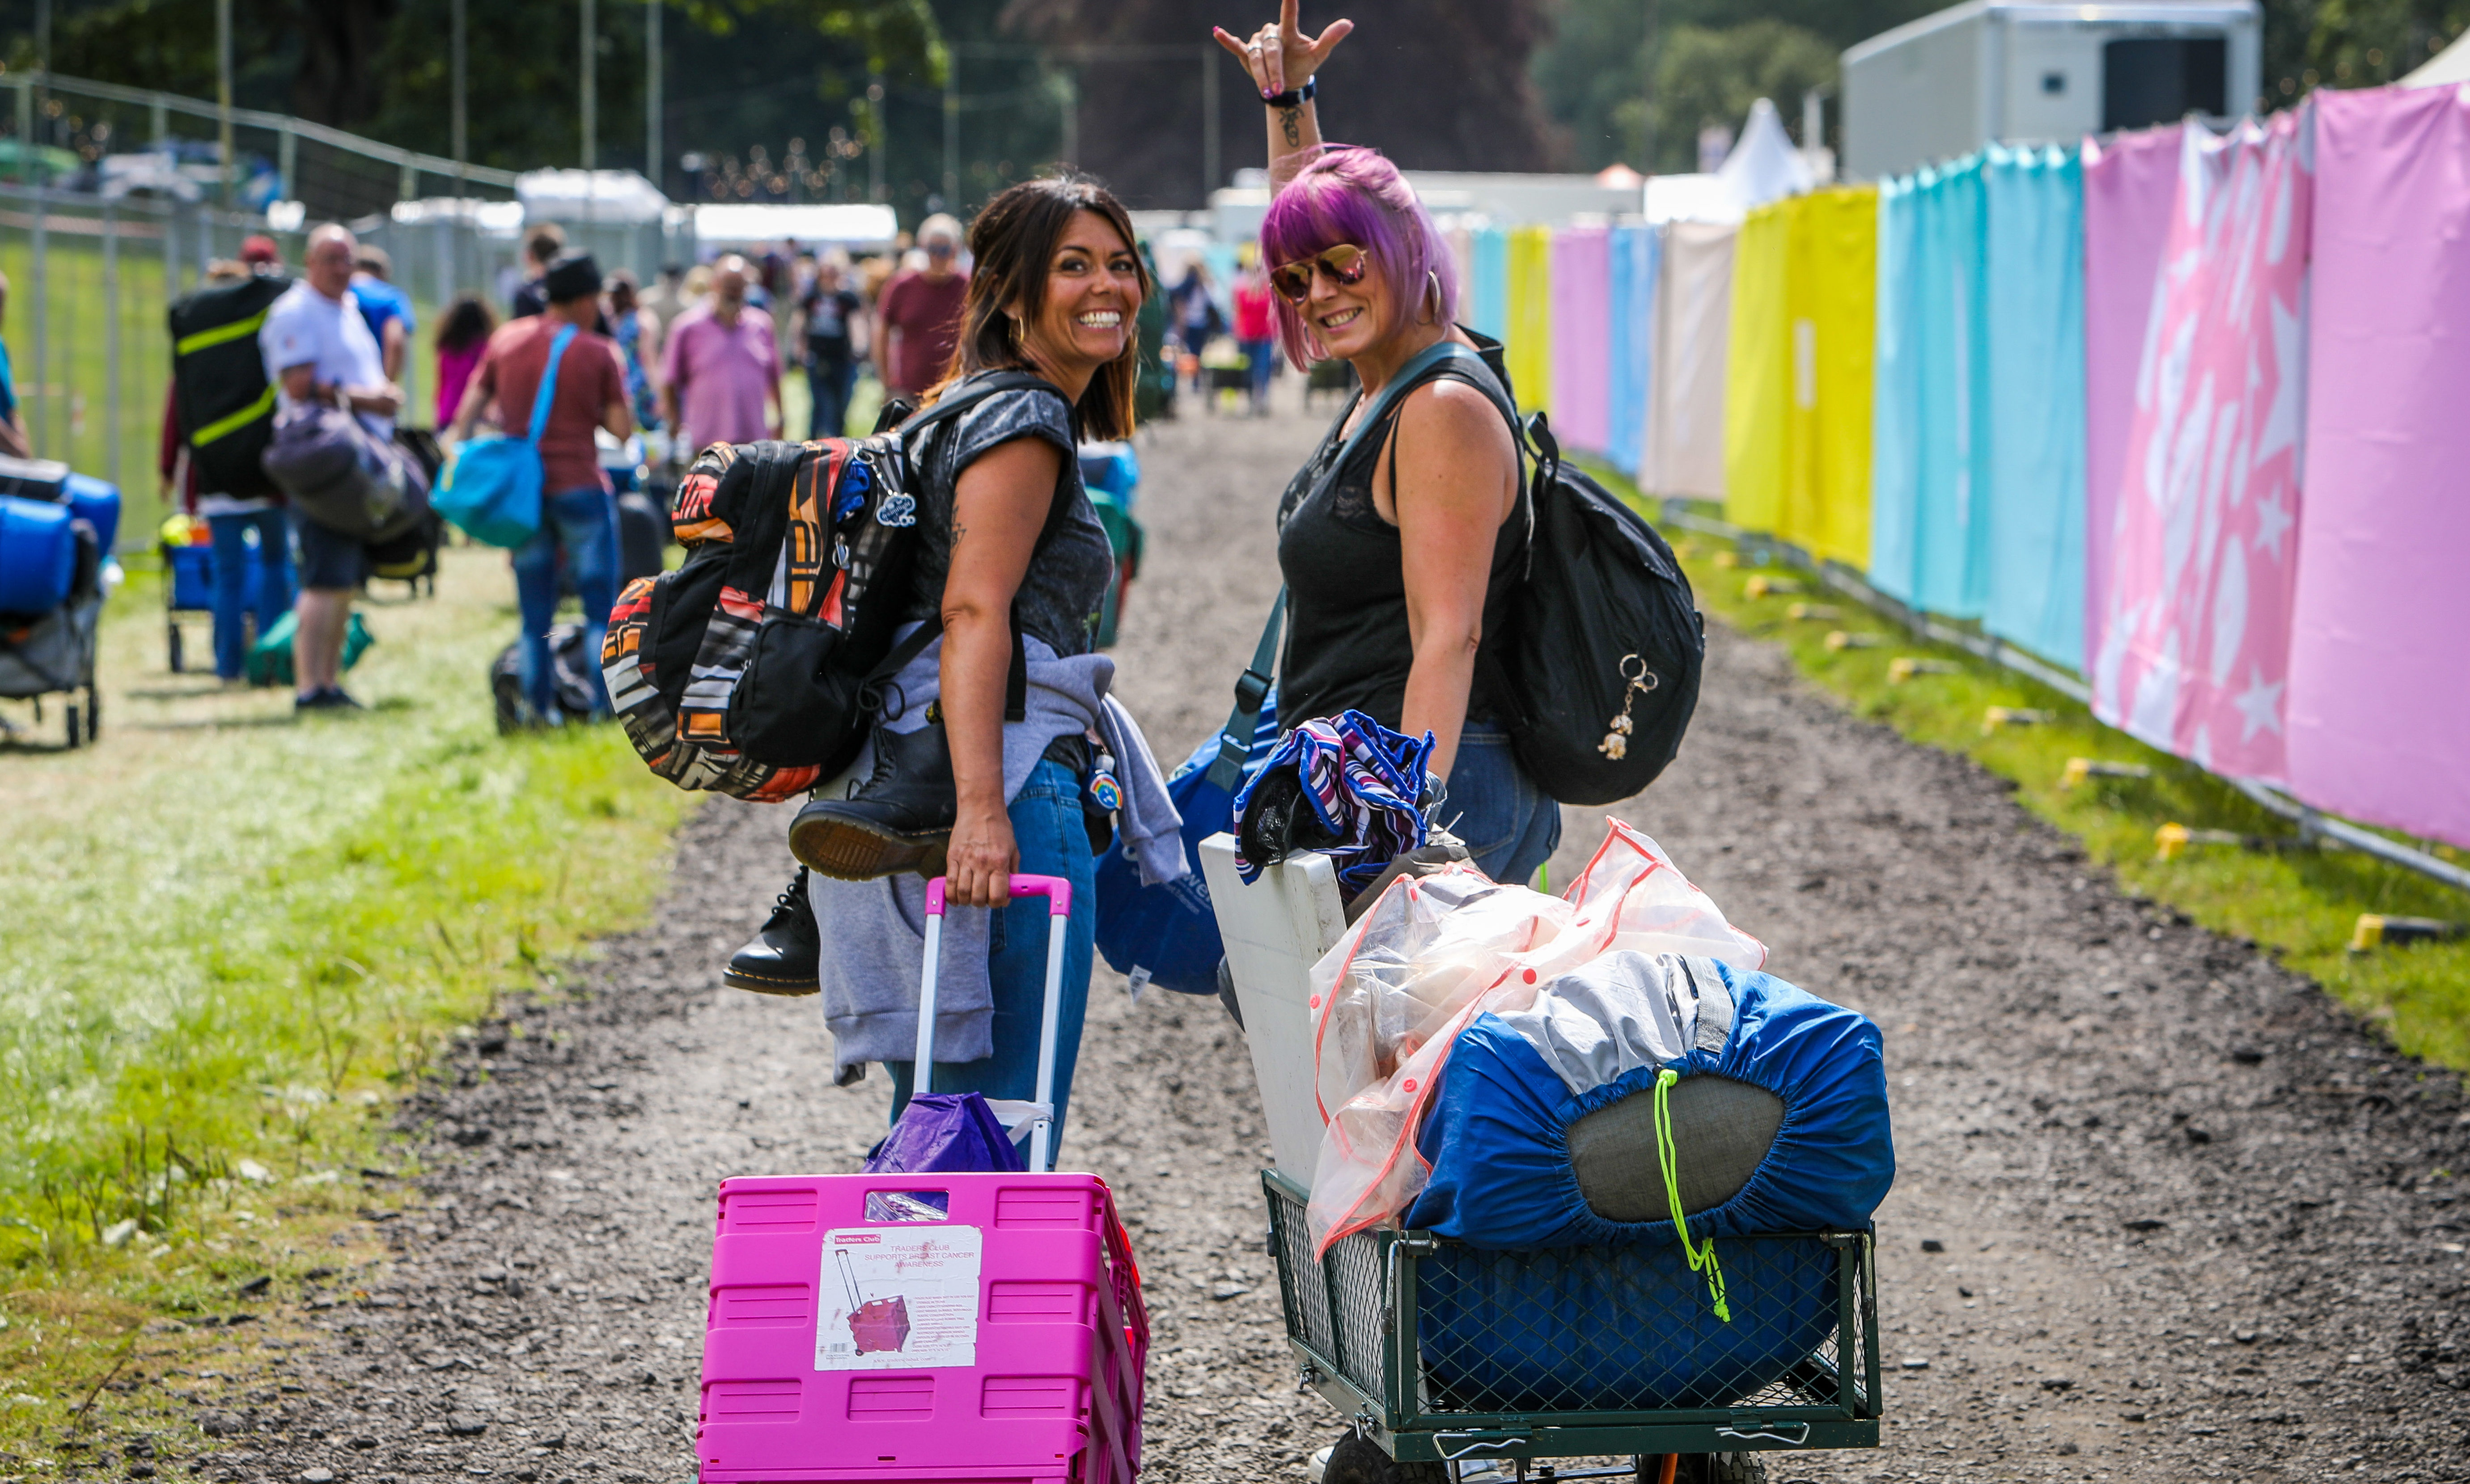 Campers at Rewind 2019 at Scone Palace.